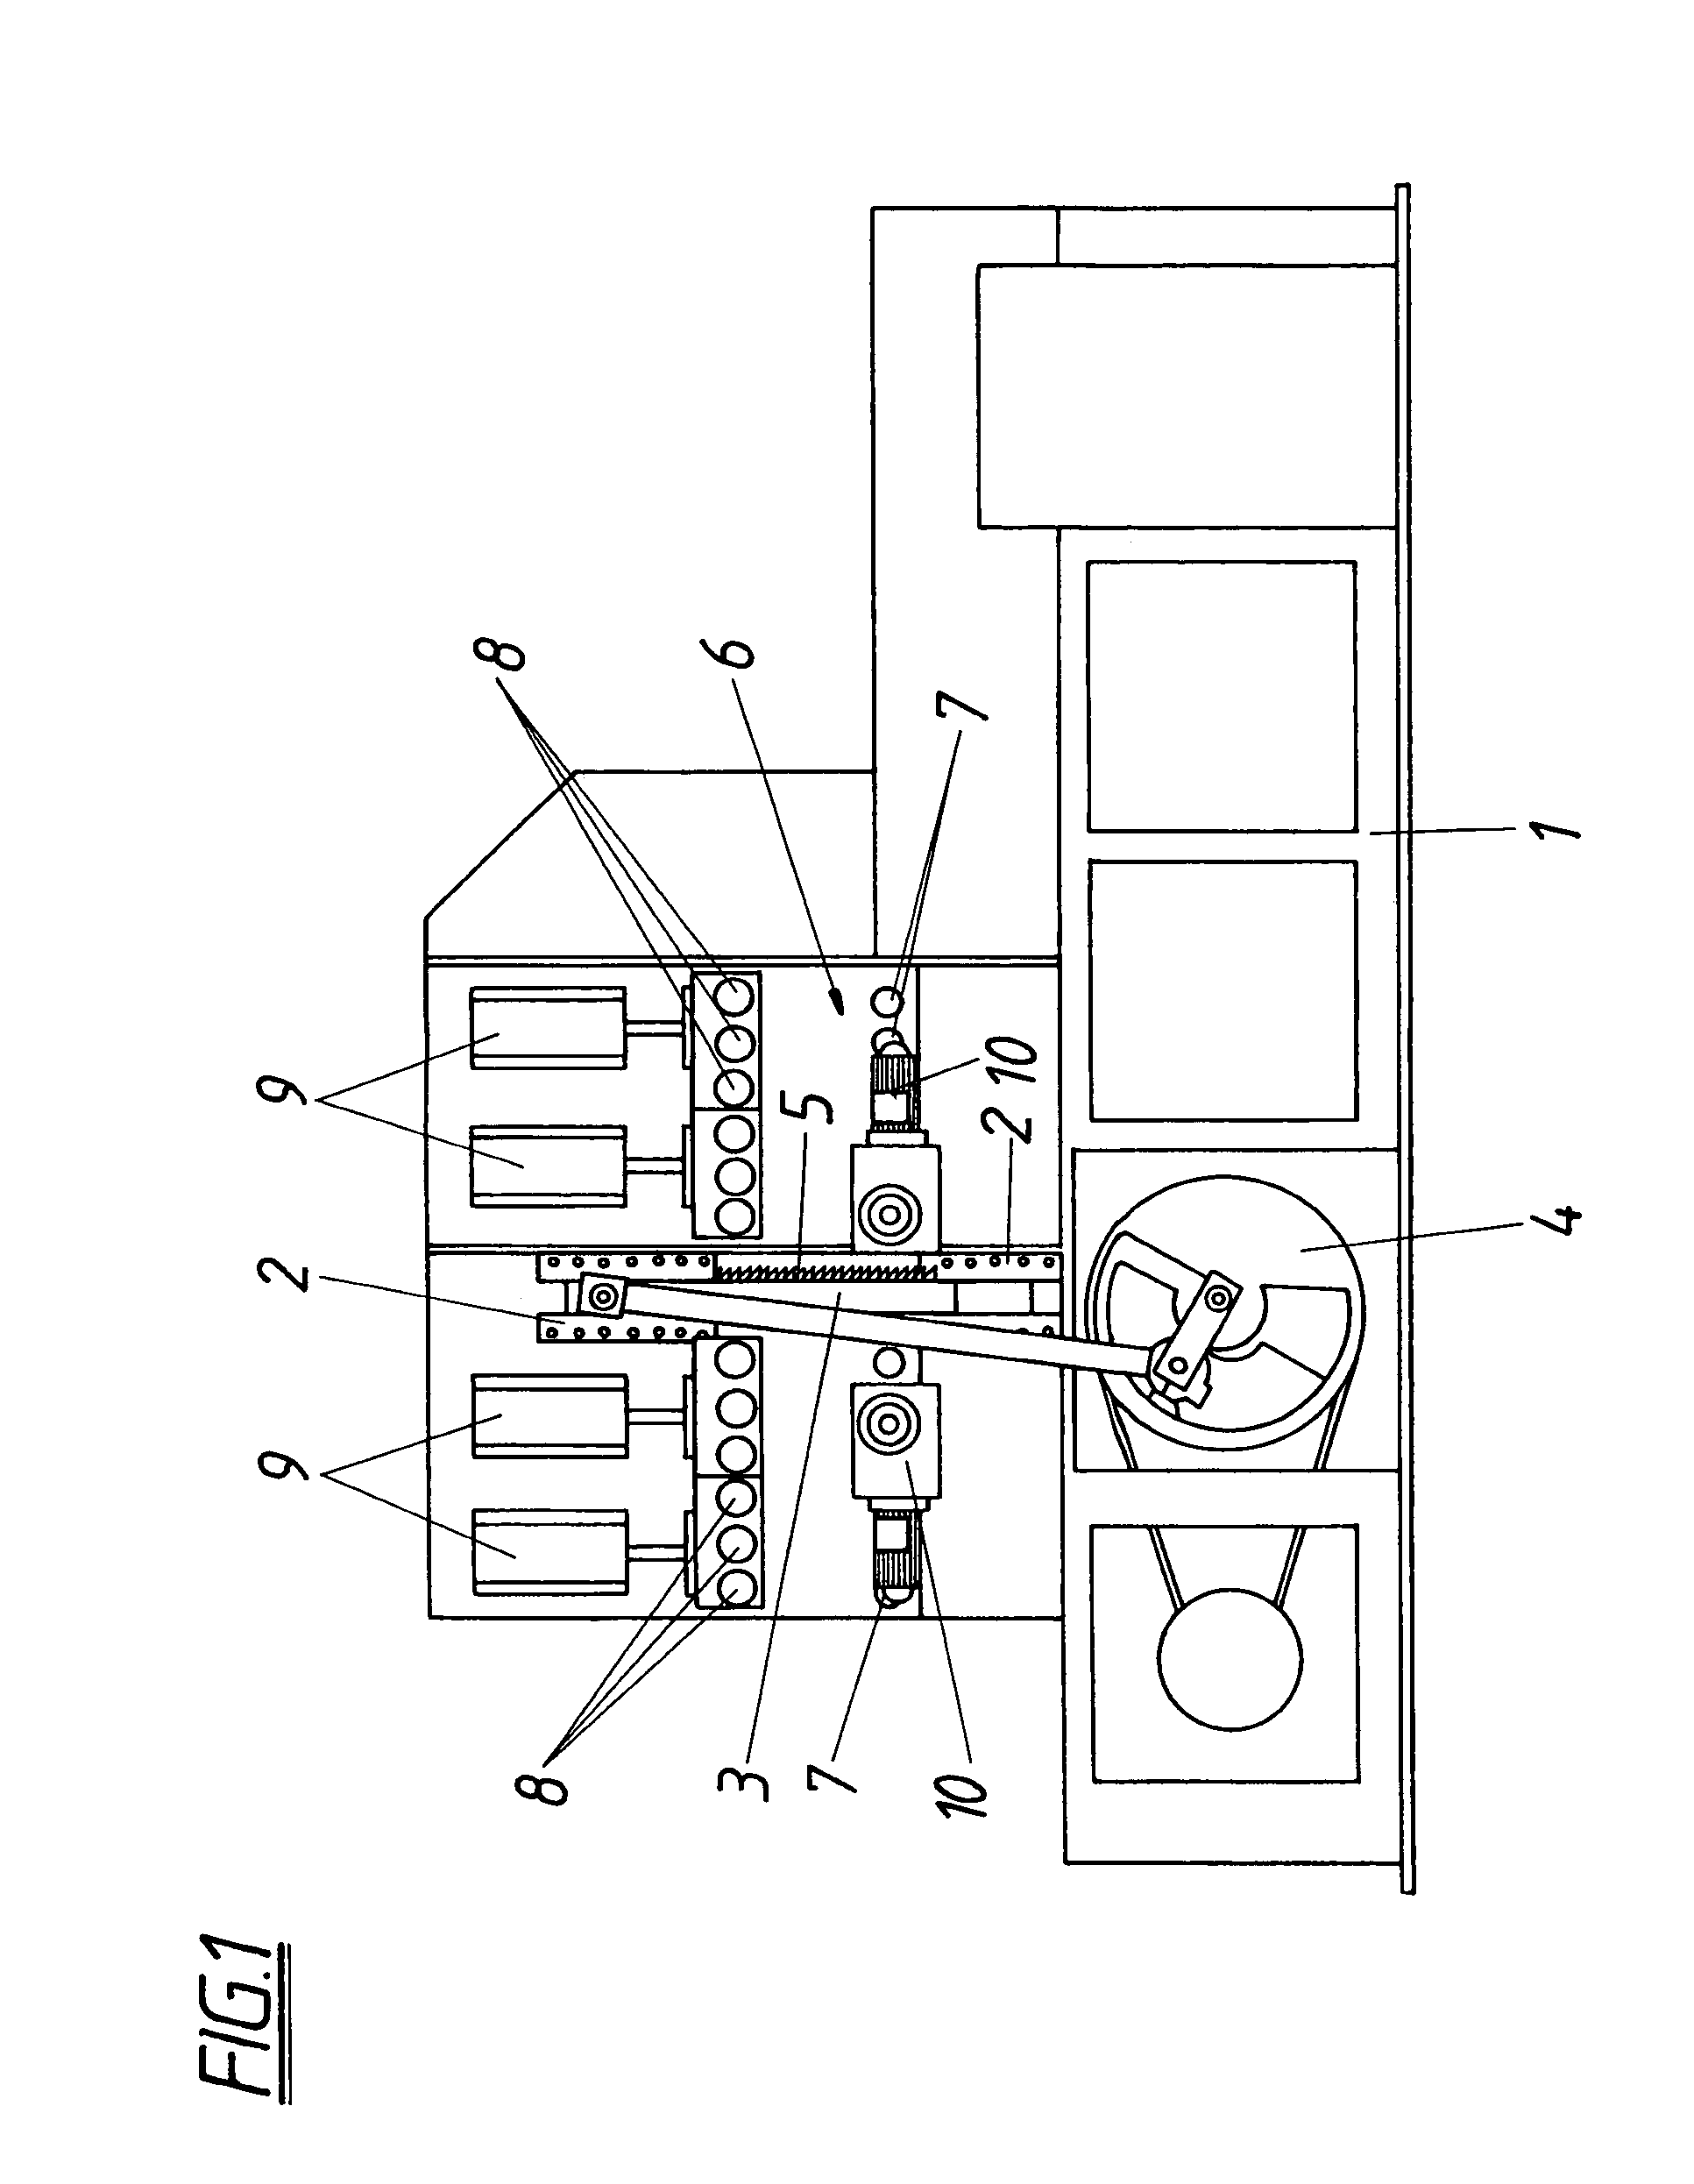 Reciprocating saw comprising a program-controlled feed conveyor for advancing the item to be cut